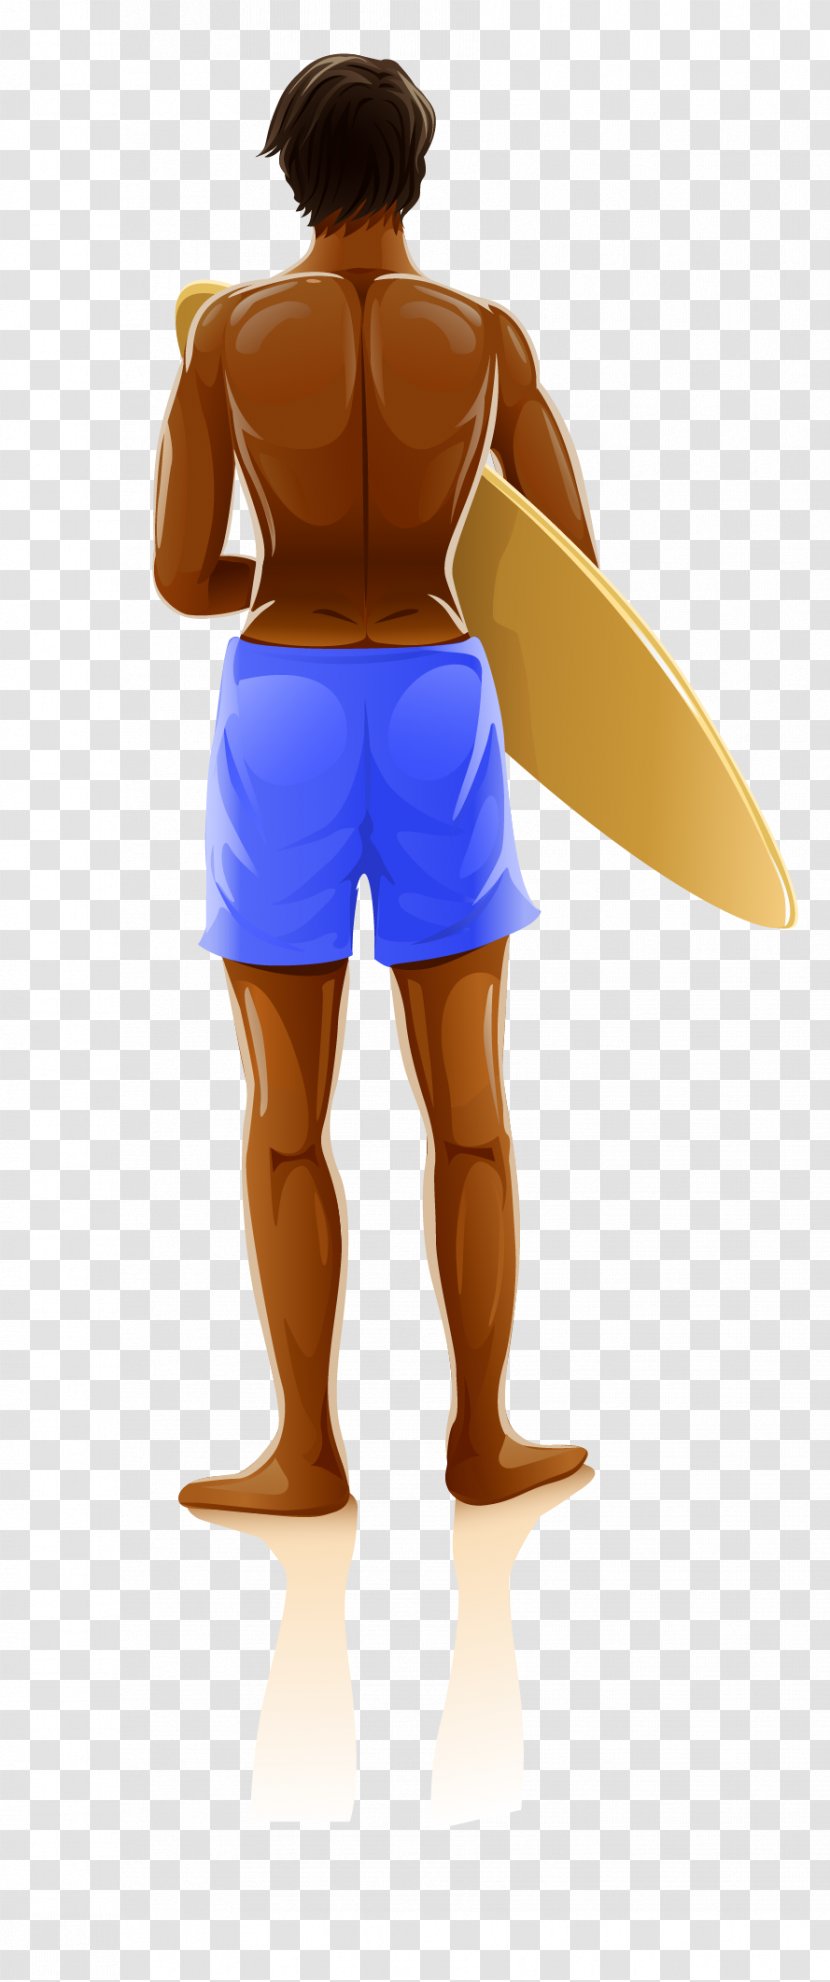 Beach - Watercolor - Surfing People Transparent PNG